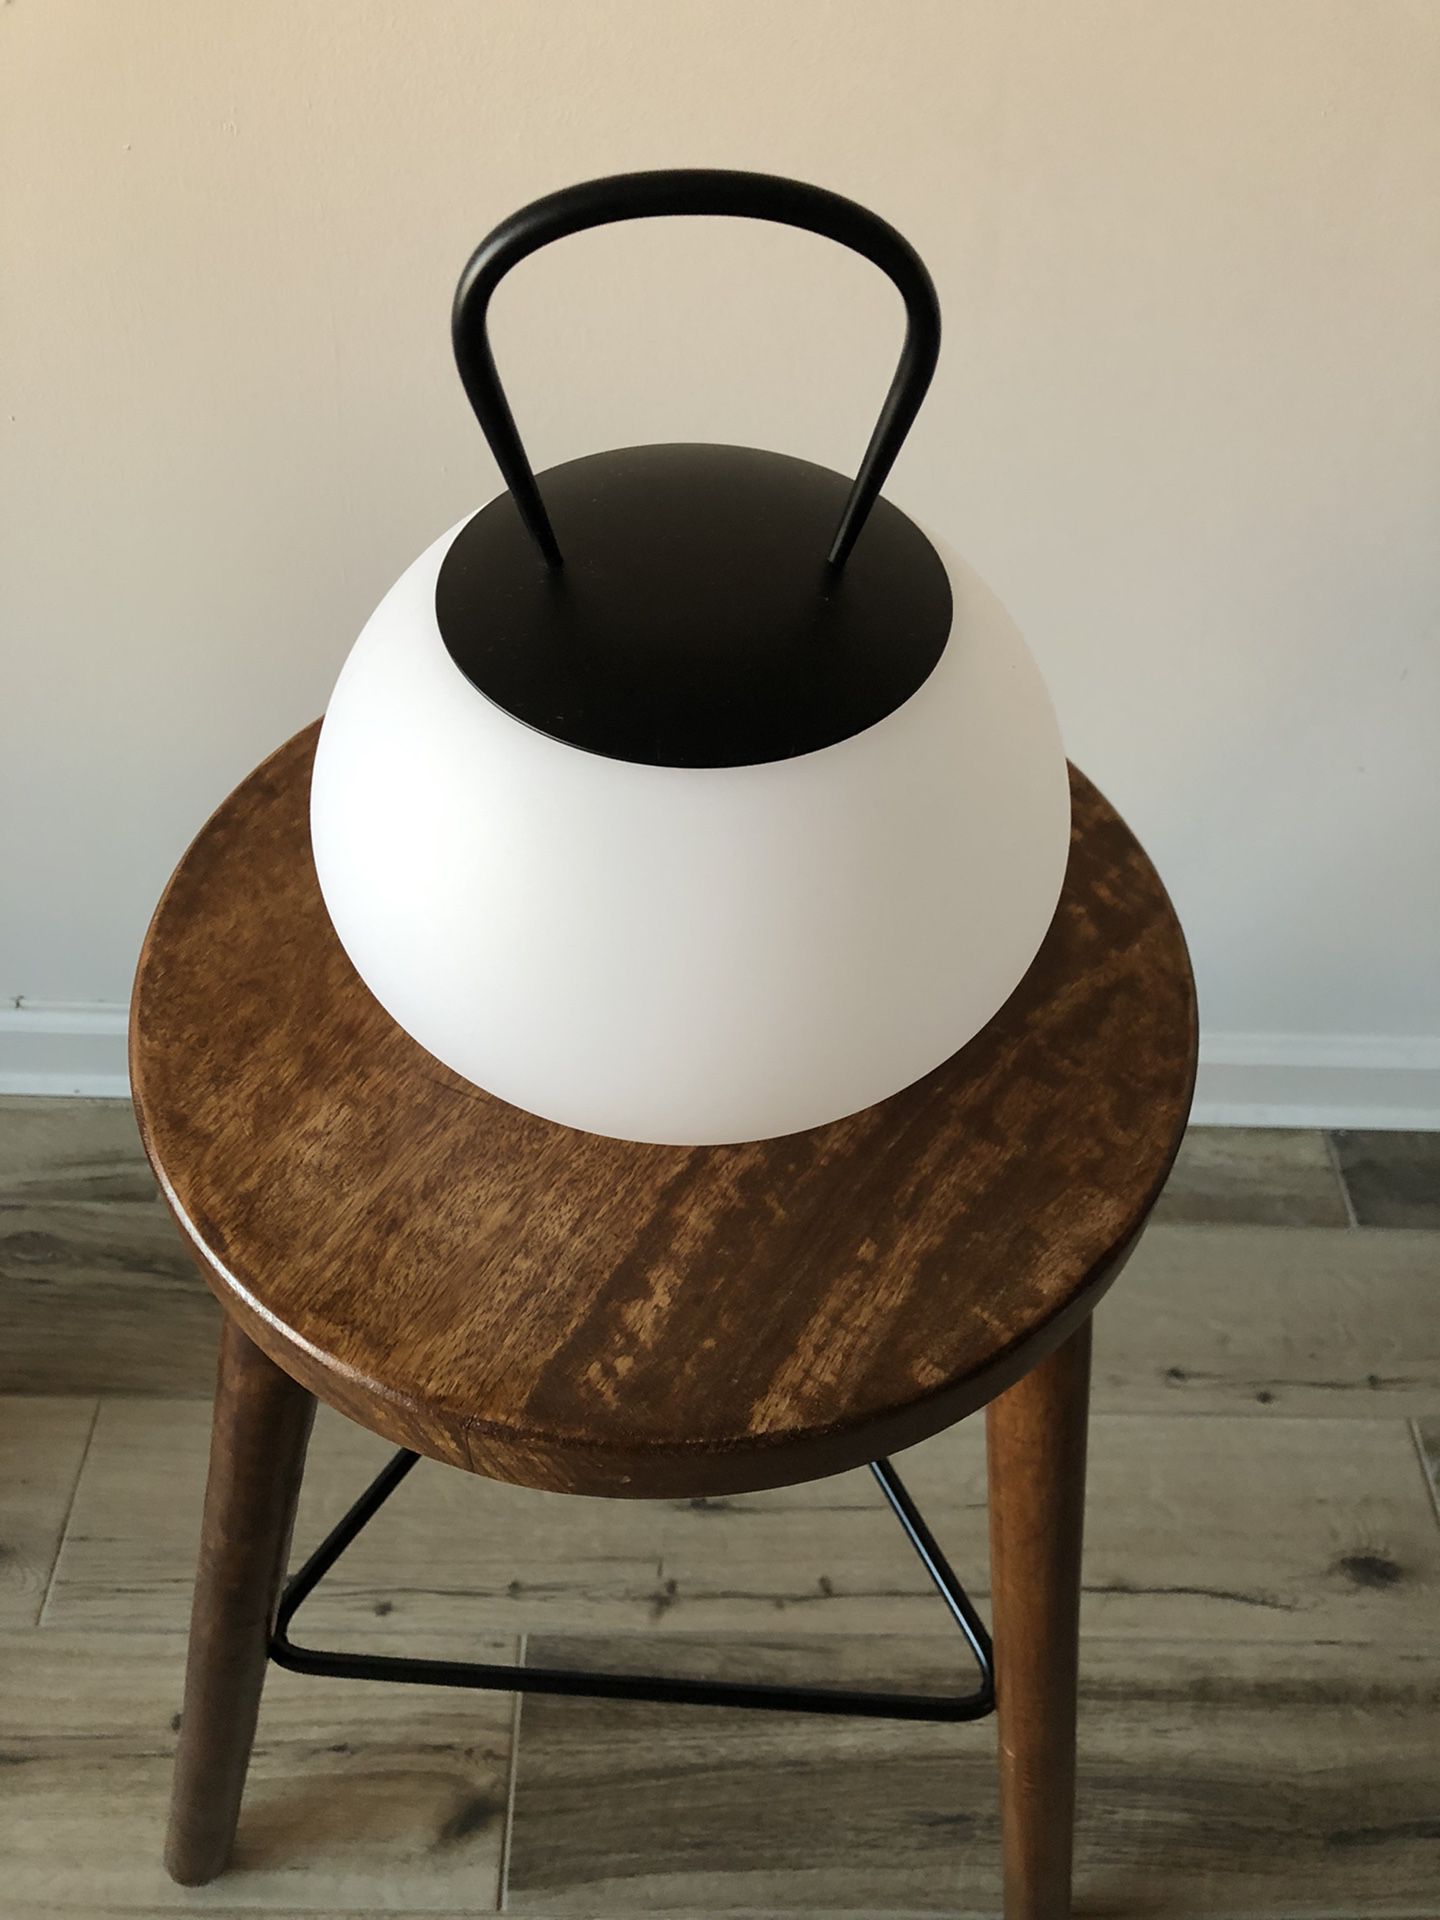 over Obsessie Bukken Zara Home Lamp With Metal Handle for Sale in New York, NY - OfferUp